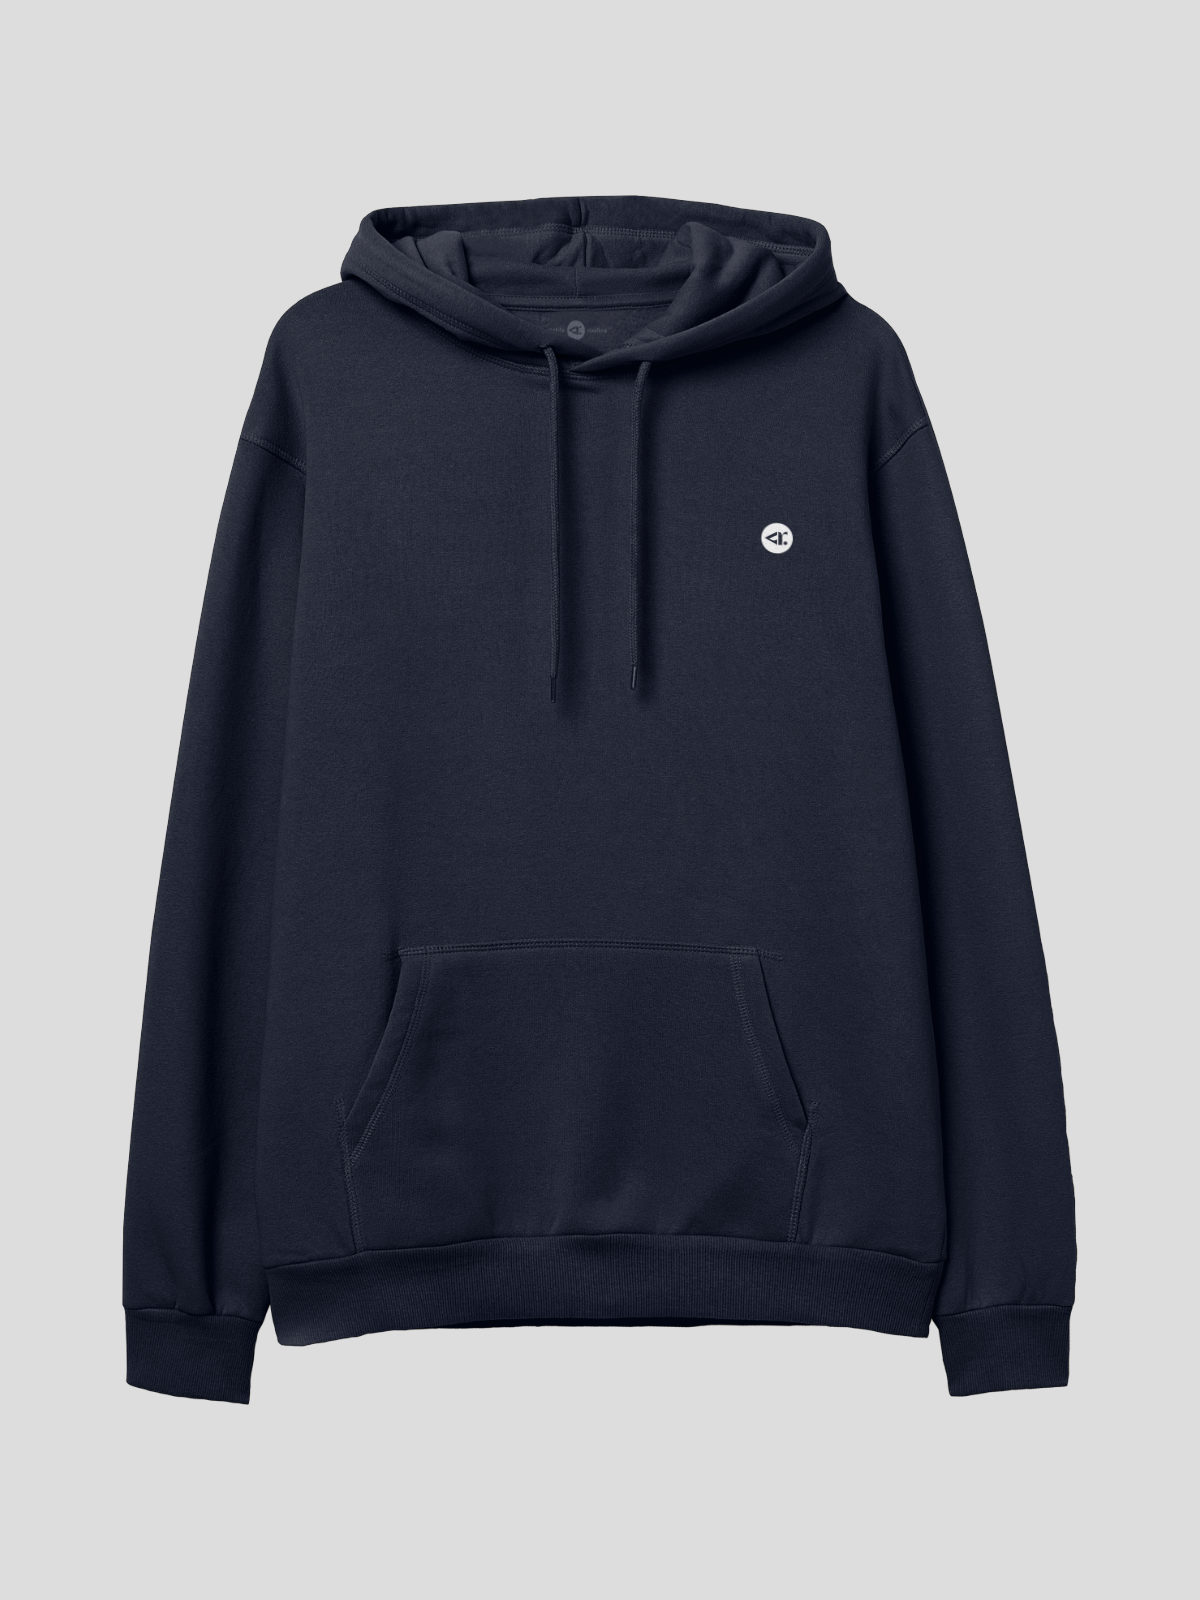 Hoodie Unisex Rounded navy blue